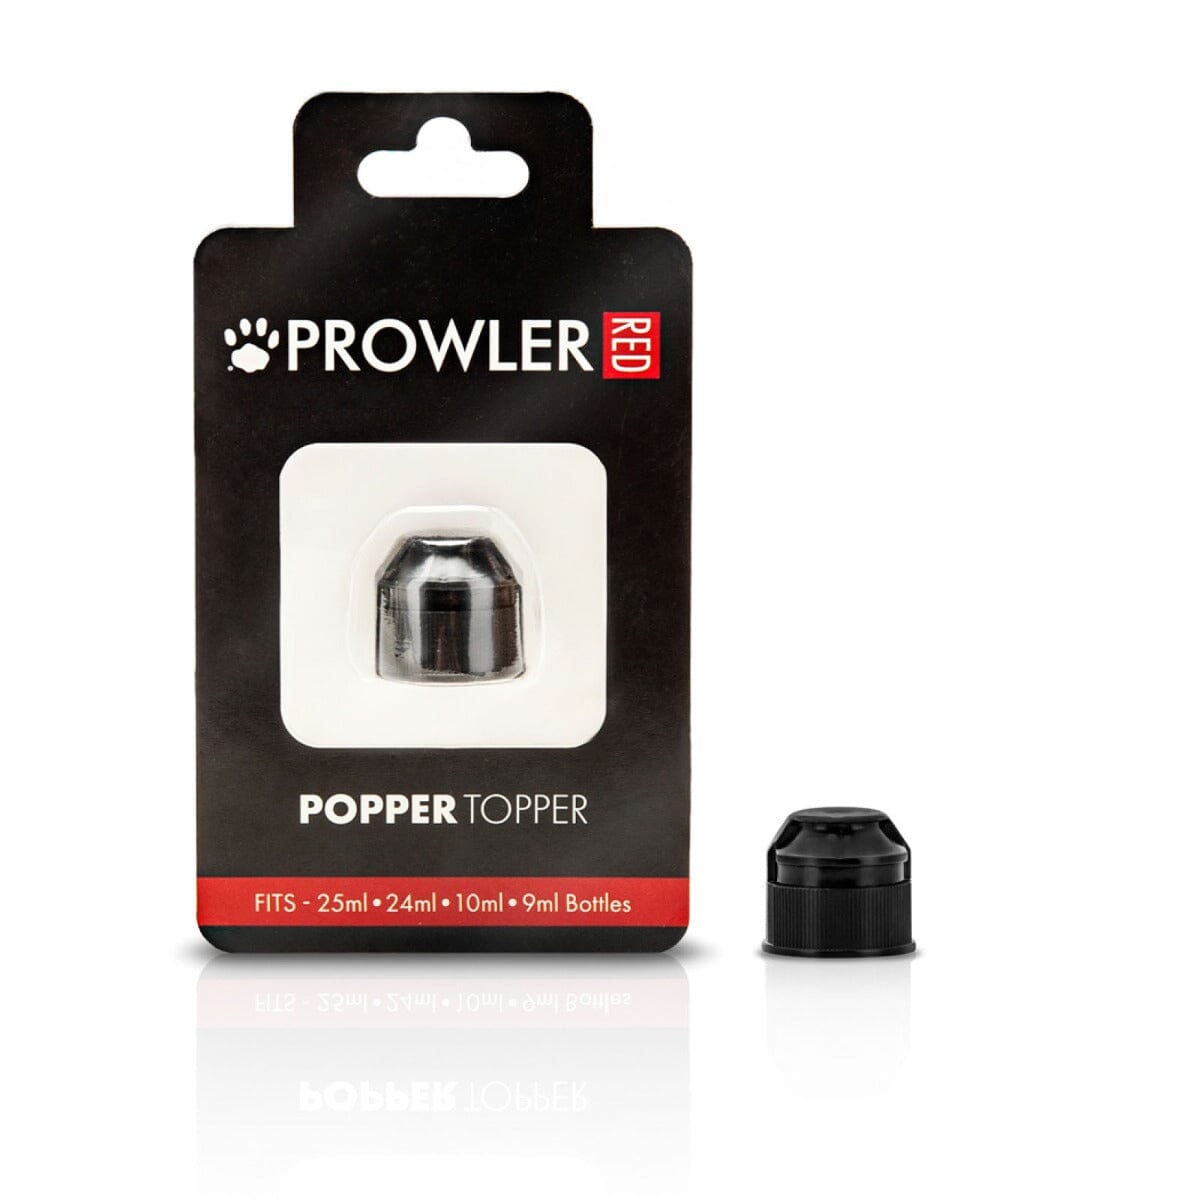 Prowler Red Popper Topper - Easy One-Handed Access for Aromas